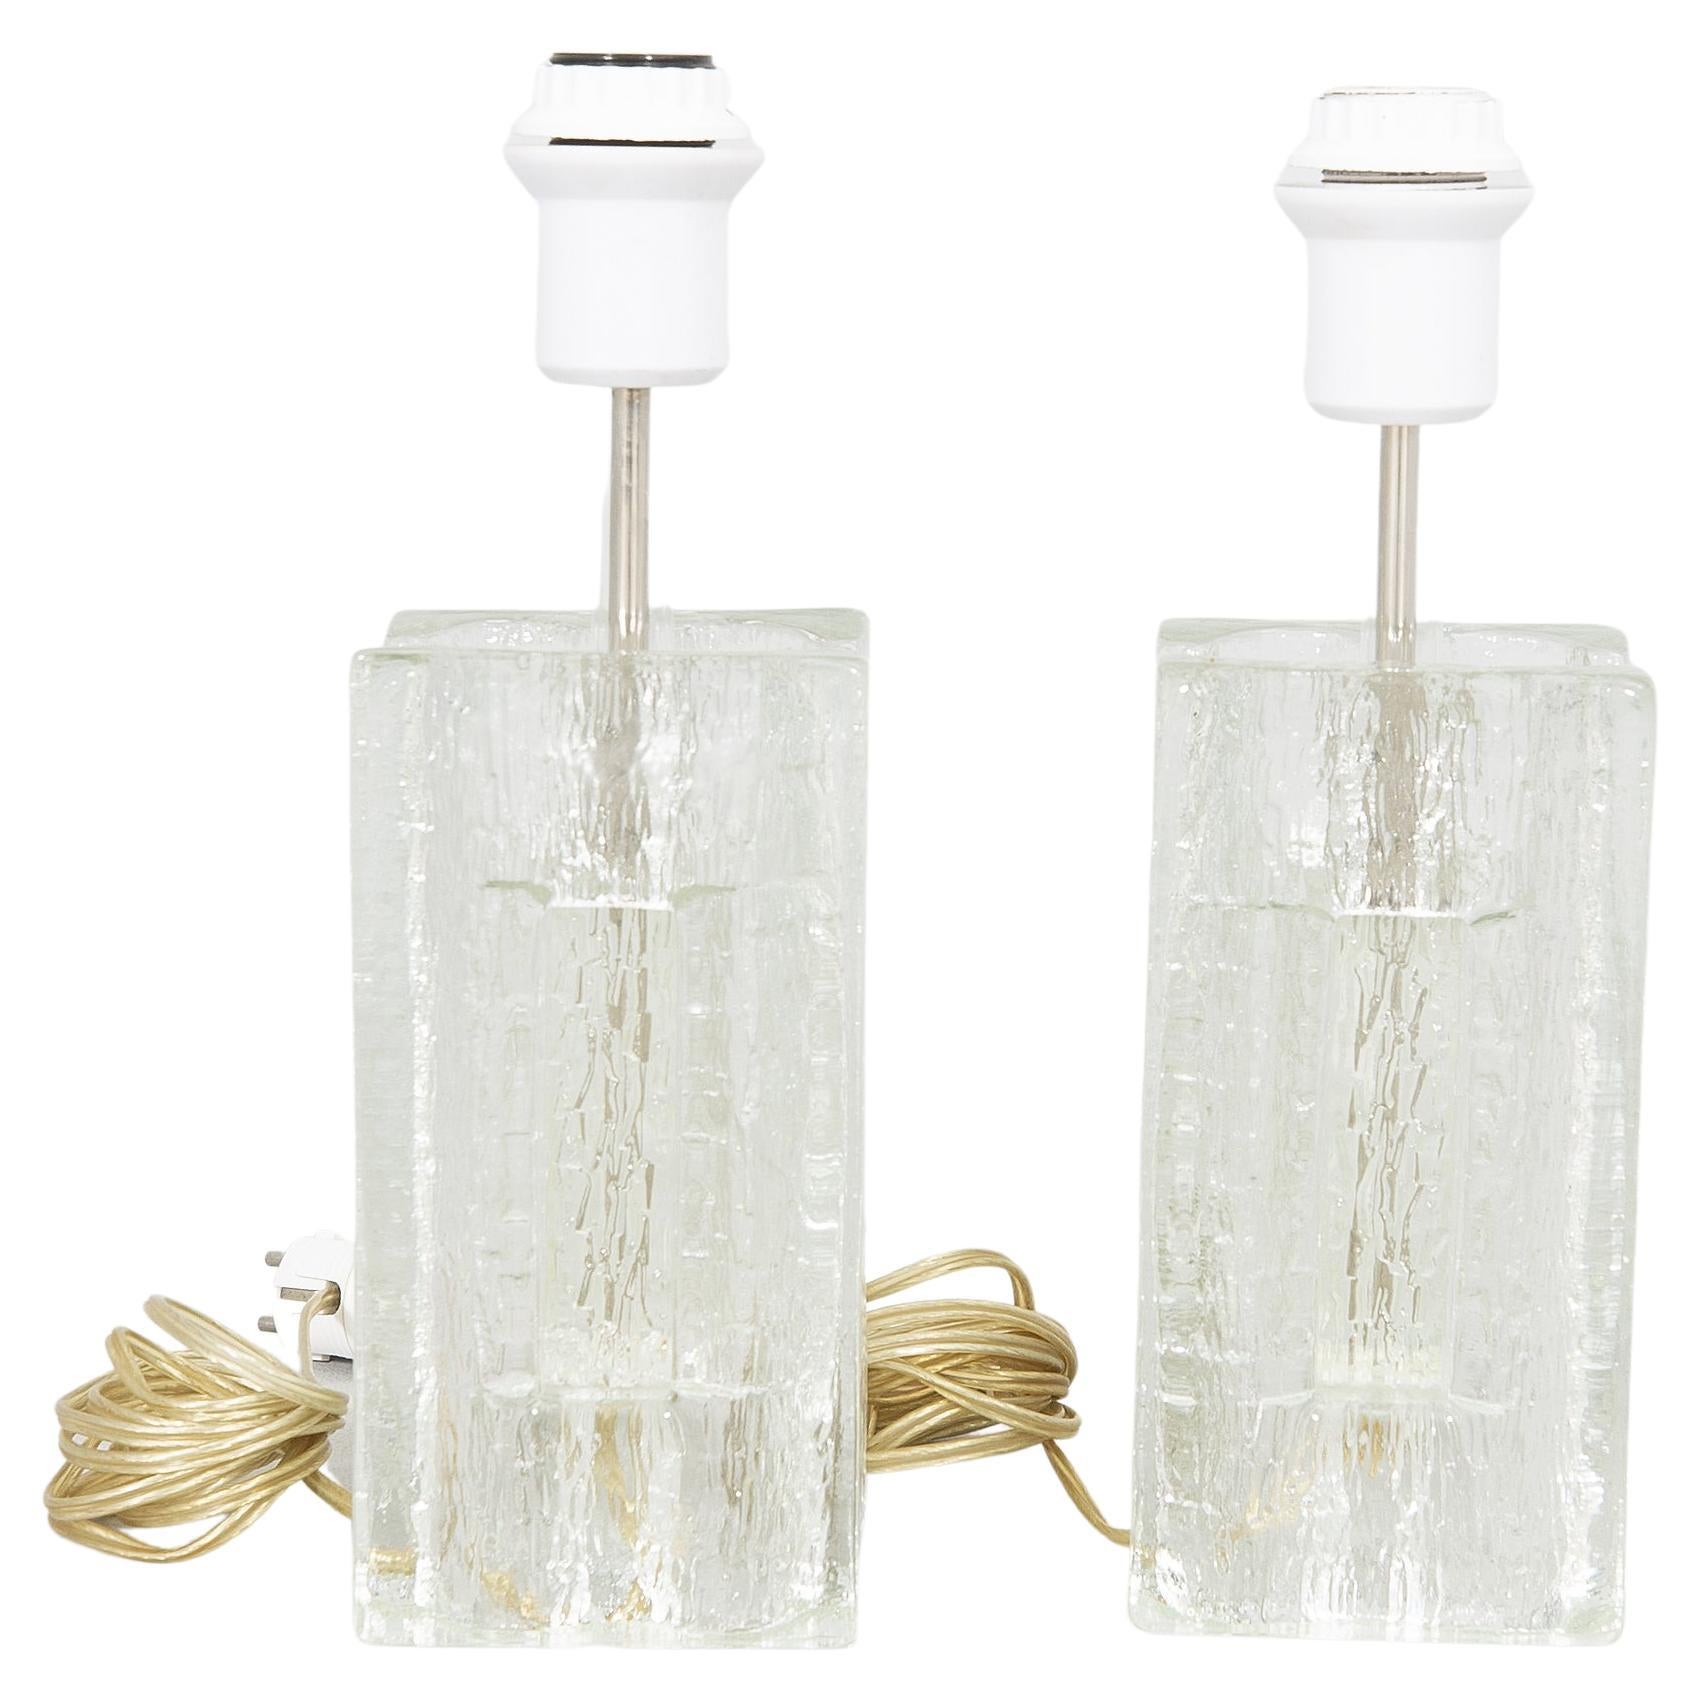 Crystal Blocks Table Lamps a Pair by Pukeberg, Sweden, 1970 For Sale